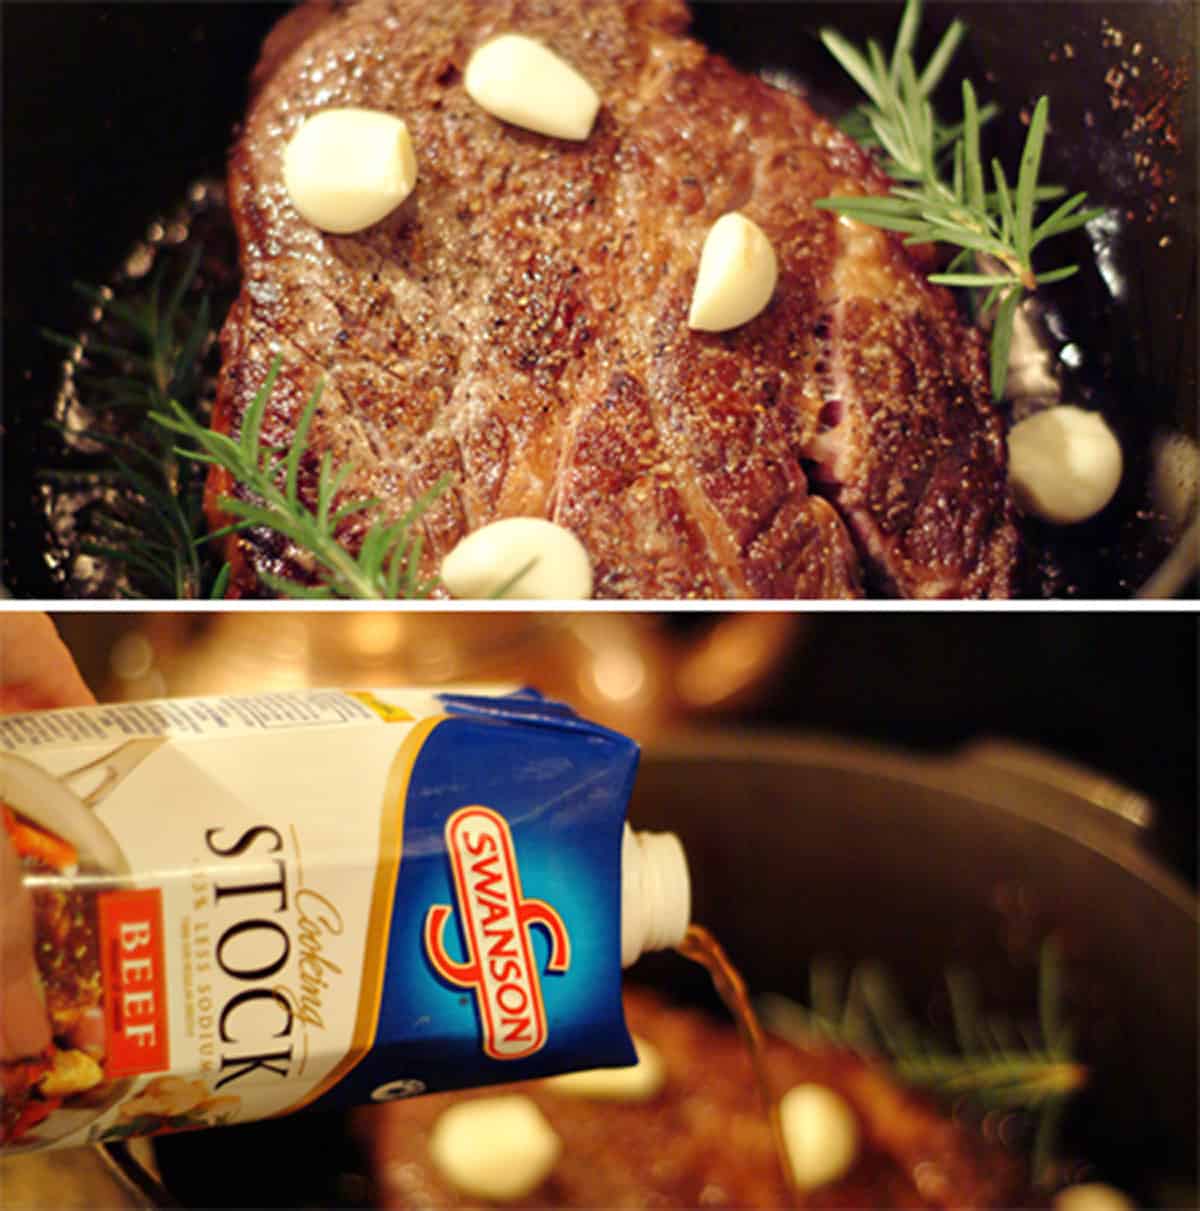 Adding seasonings and broth to the browned pot roast.